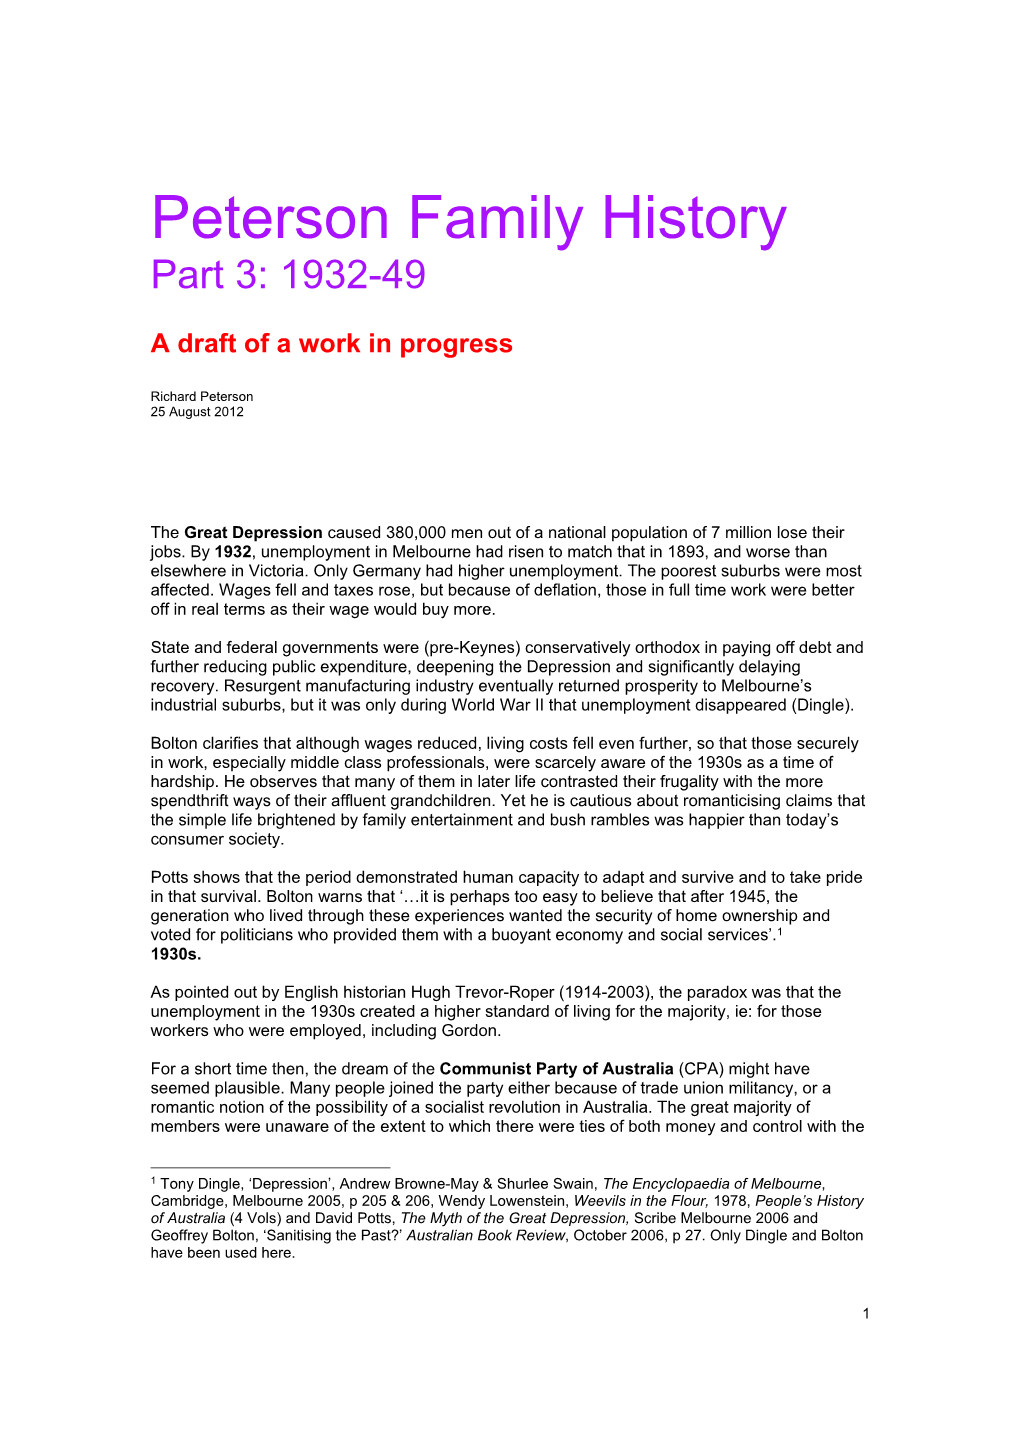 Peterson Family History Part 3: 1932-49